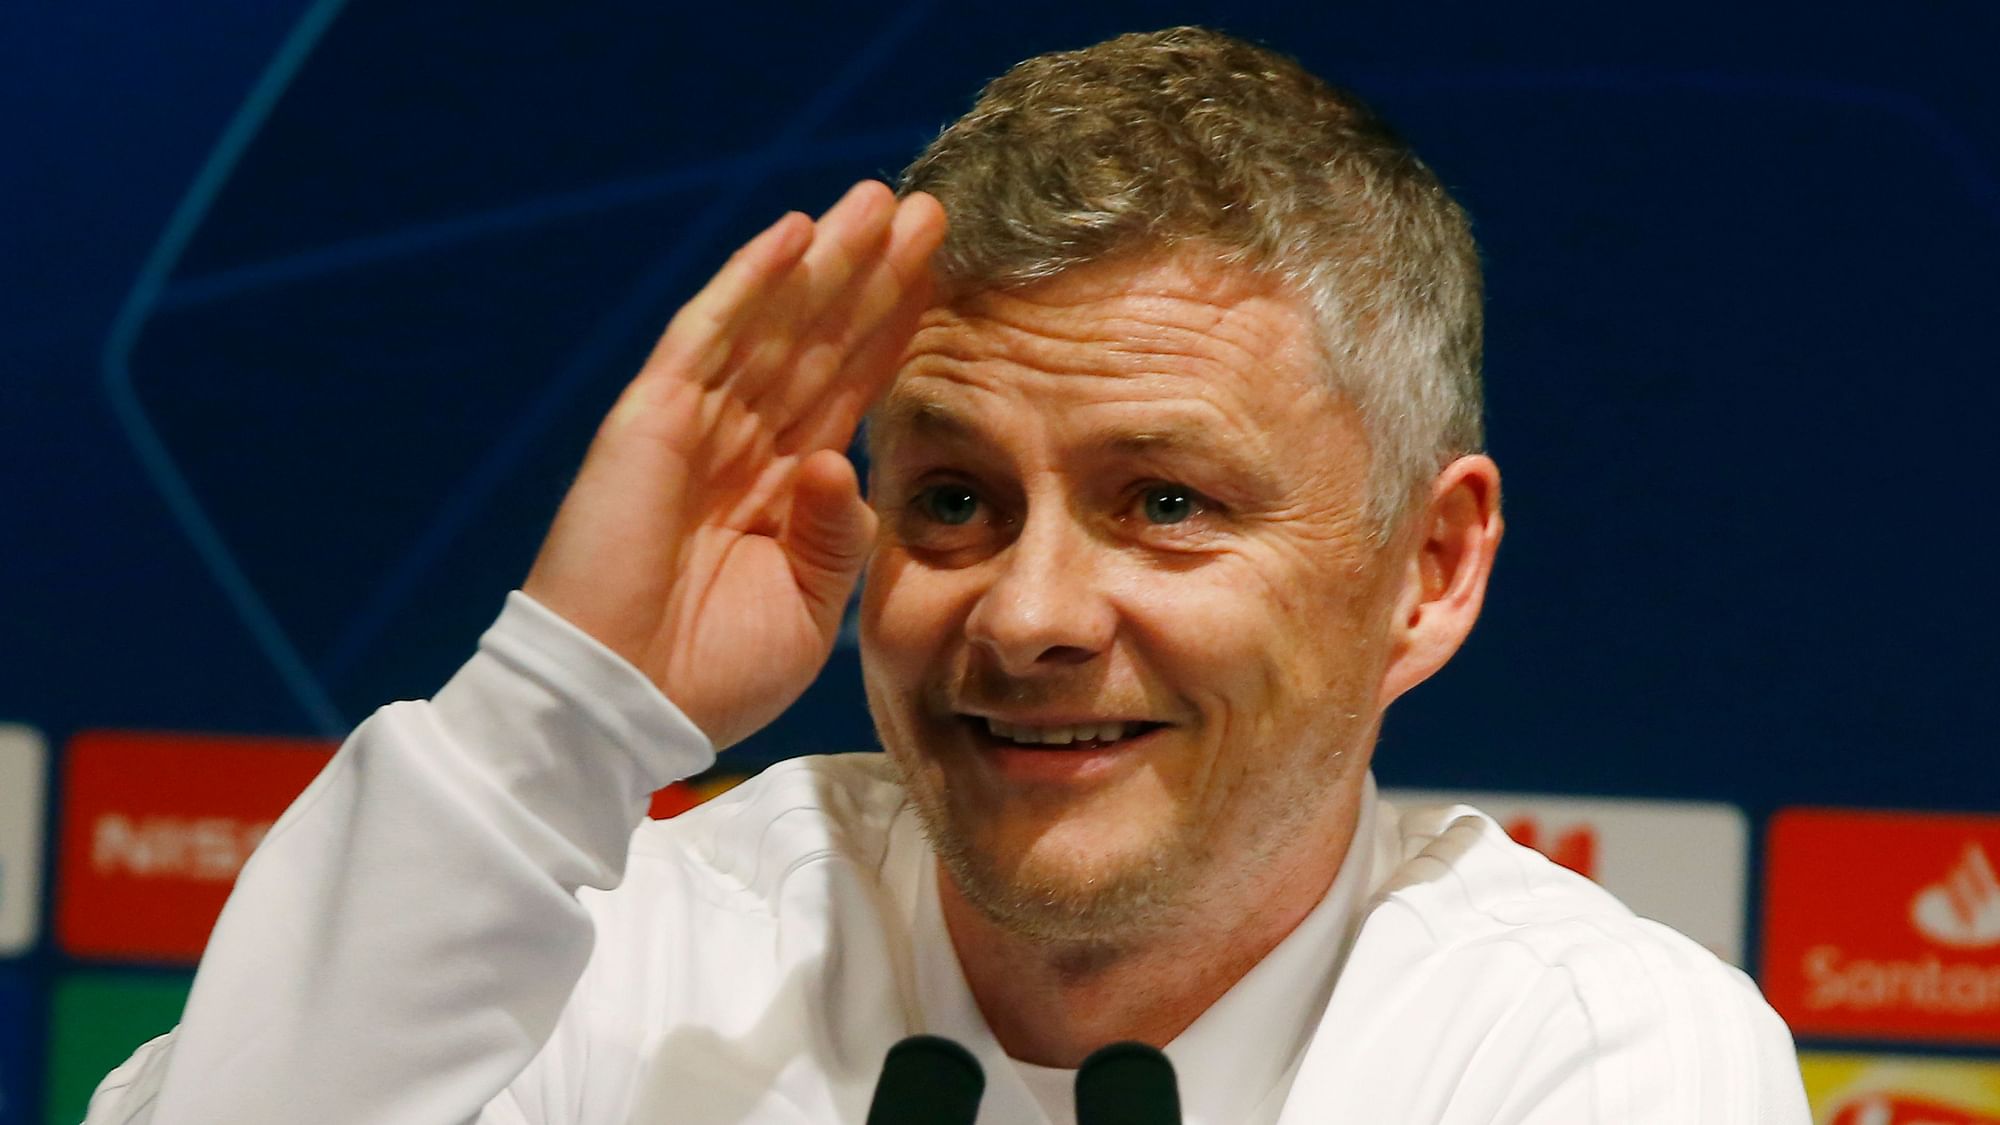 Manchester United interim manager Ole Gunnar Solskjaer said his team “always believed” they could overcome Paris St Germain.